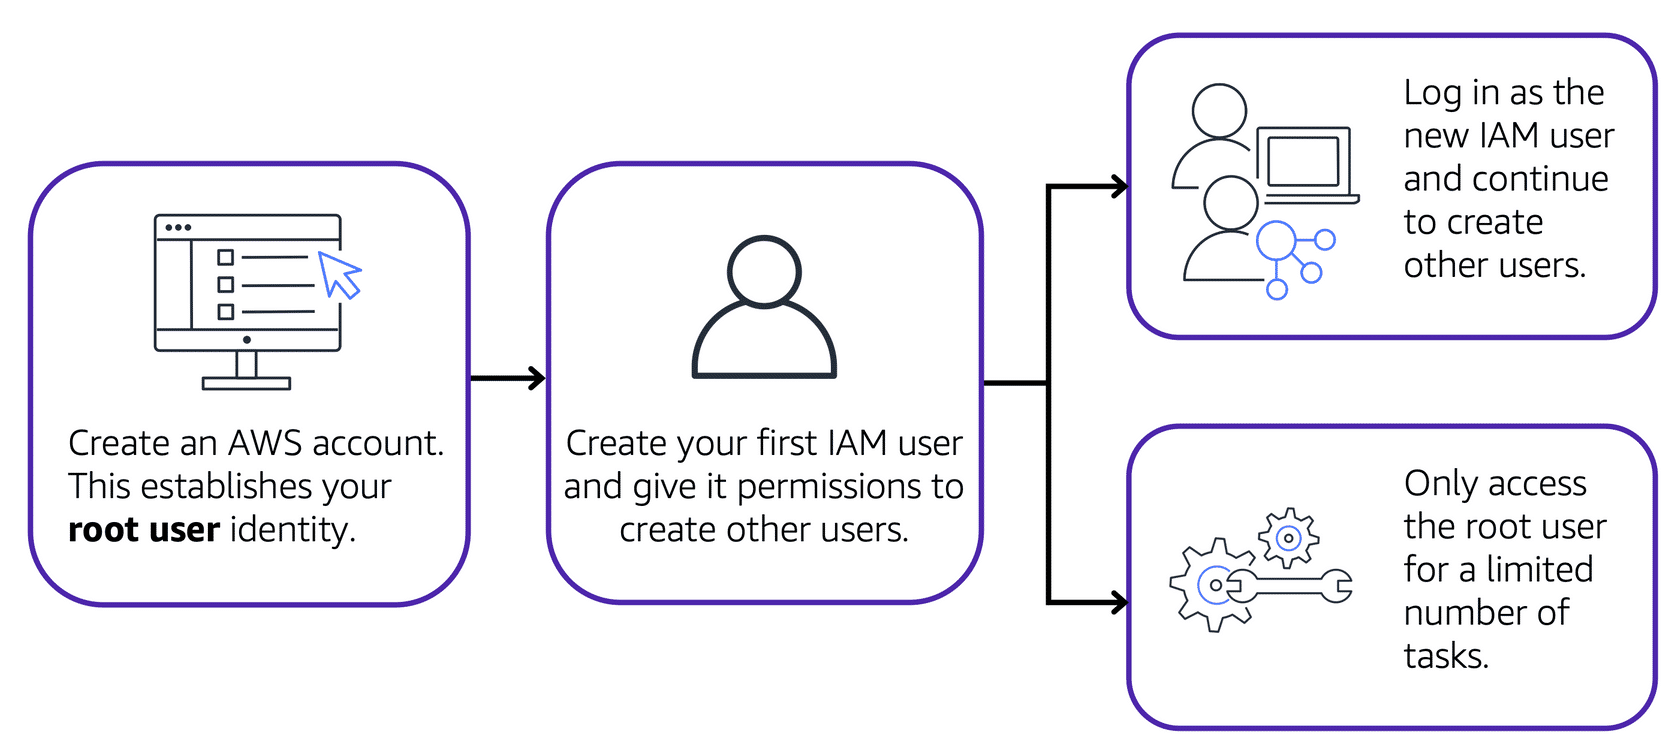 Workflow showing responsibilities of root users as opposed to IAM users